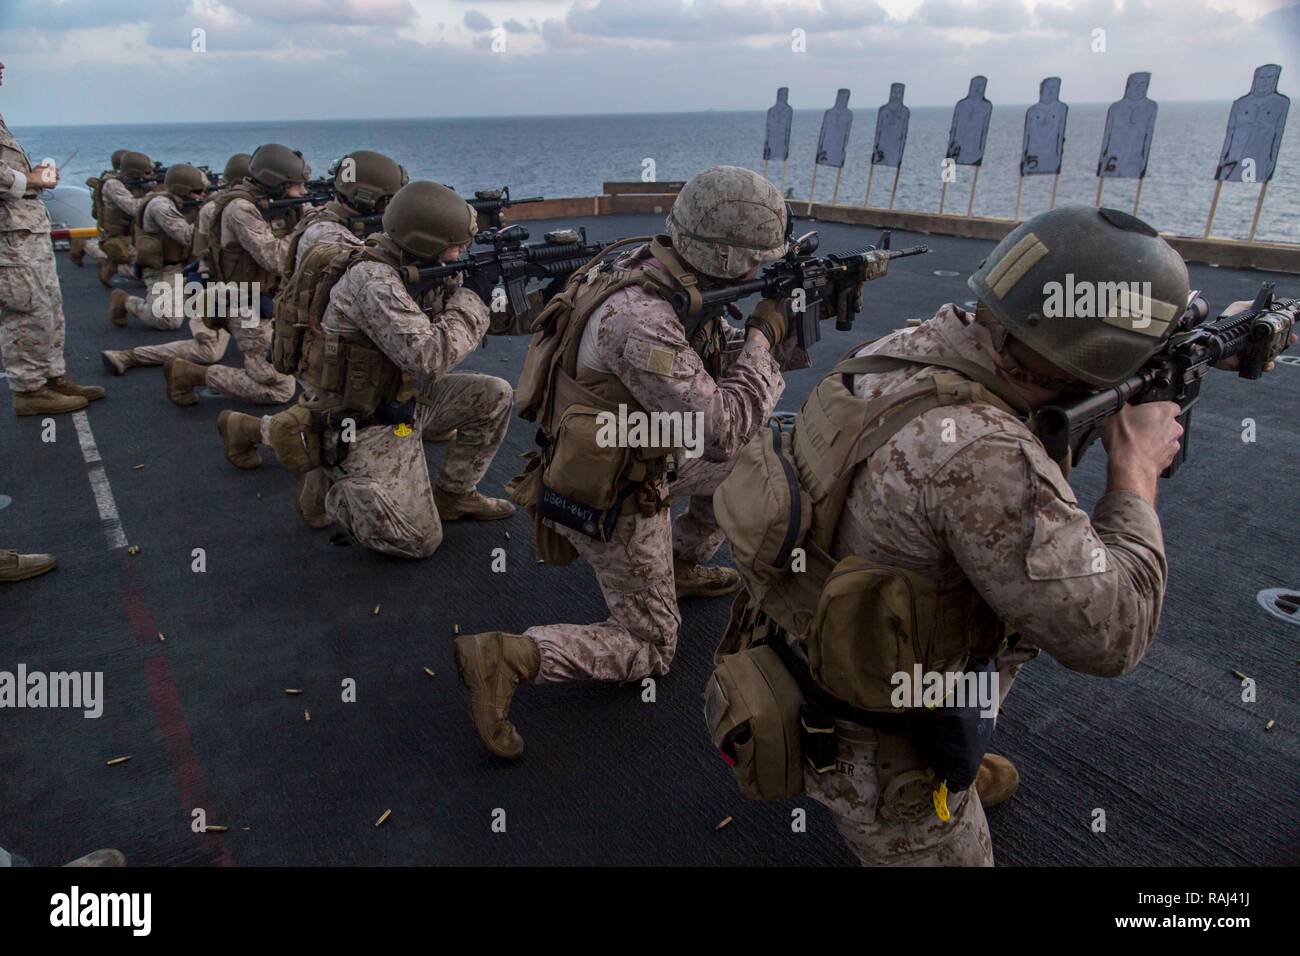 ARABIAN SEA – U.S. Marines with the Command Element, 13th Marine Expeditionary Unit (MEU), fire from the kneeling position during a morning rifle range aboard the Wasp-class amphibious assault ship USS Essex (LHD 2), Jan. 2, 2019. The Essex is the flagship for the Essex Amphibious Ready Group and, with the embarked 13th MEU, is deployed to the U.S. 5th Fleet area of operations in support of naval operations to ensure maritime stability in the Central Region, connecting the Mediterranean and the Pacific through the western Indian Ocean and three strategic choke points. (U.S. Marine Corps photo  Stock Photo